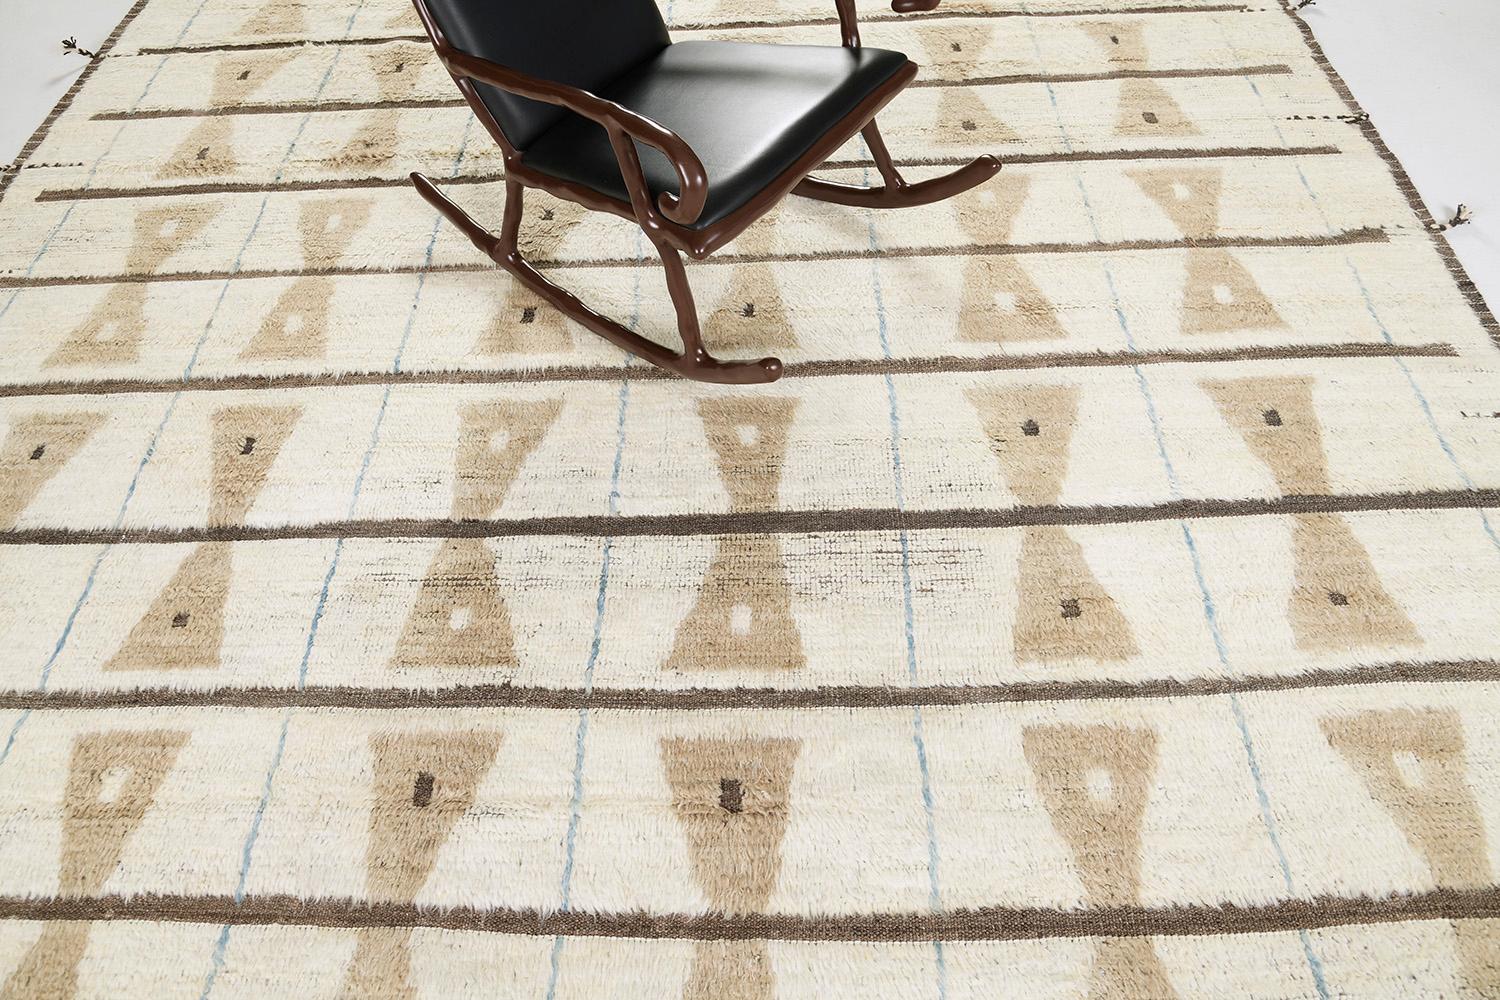 The 'Skane' rug is a handwoven wool piece inspired by vintage Scandinavian design elements and recreated for the modern design world. The repetitive grid creates balance and harmony, woven with a two-toned neutral color palette of gold and brown.